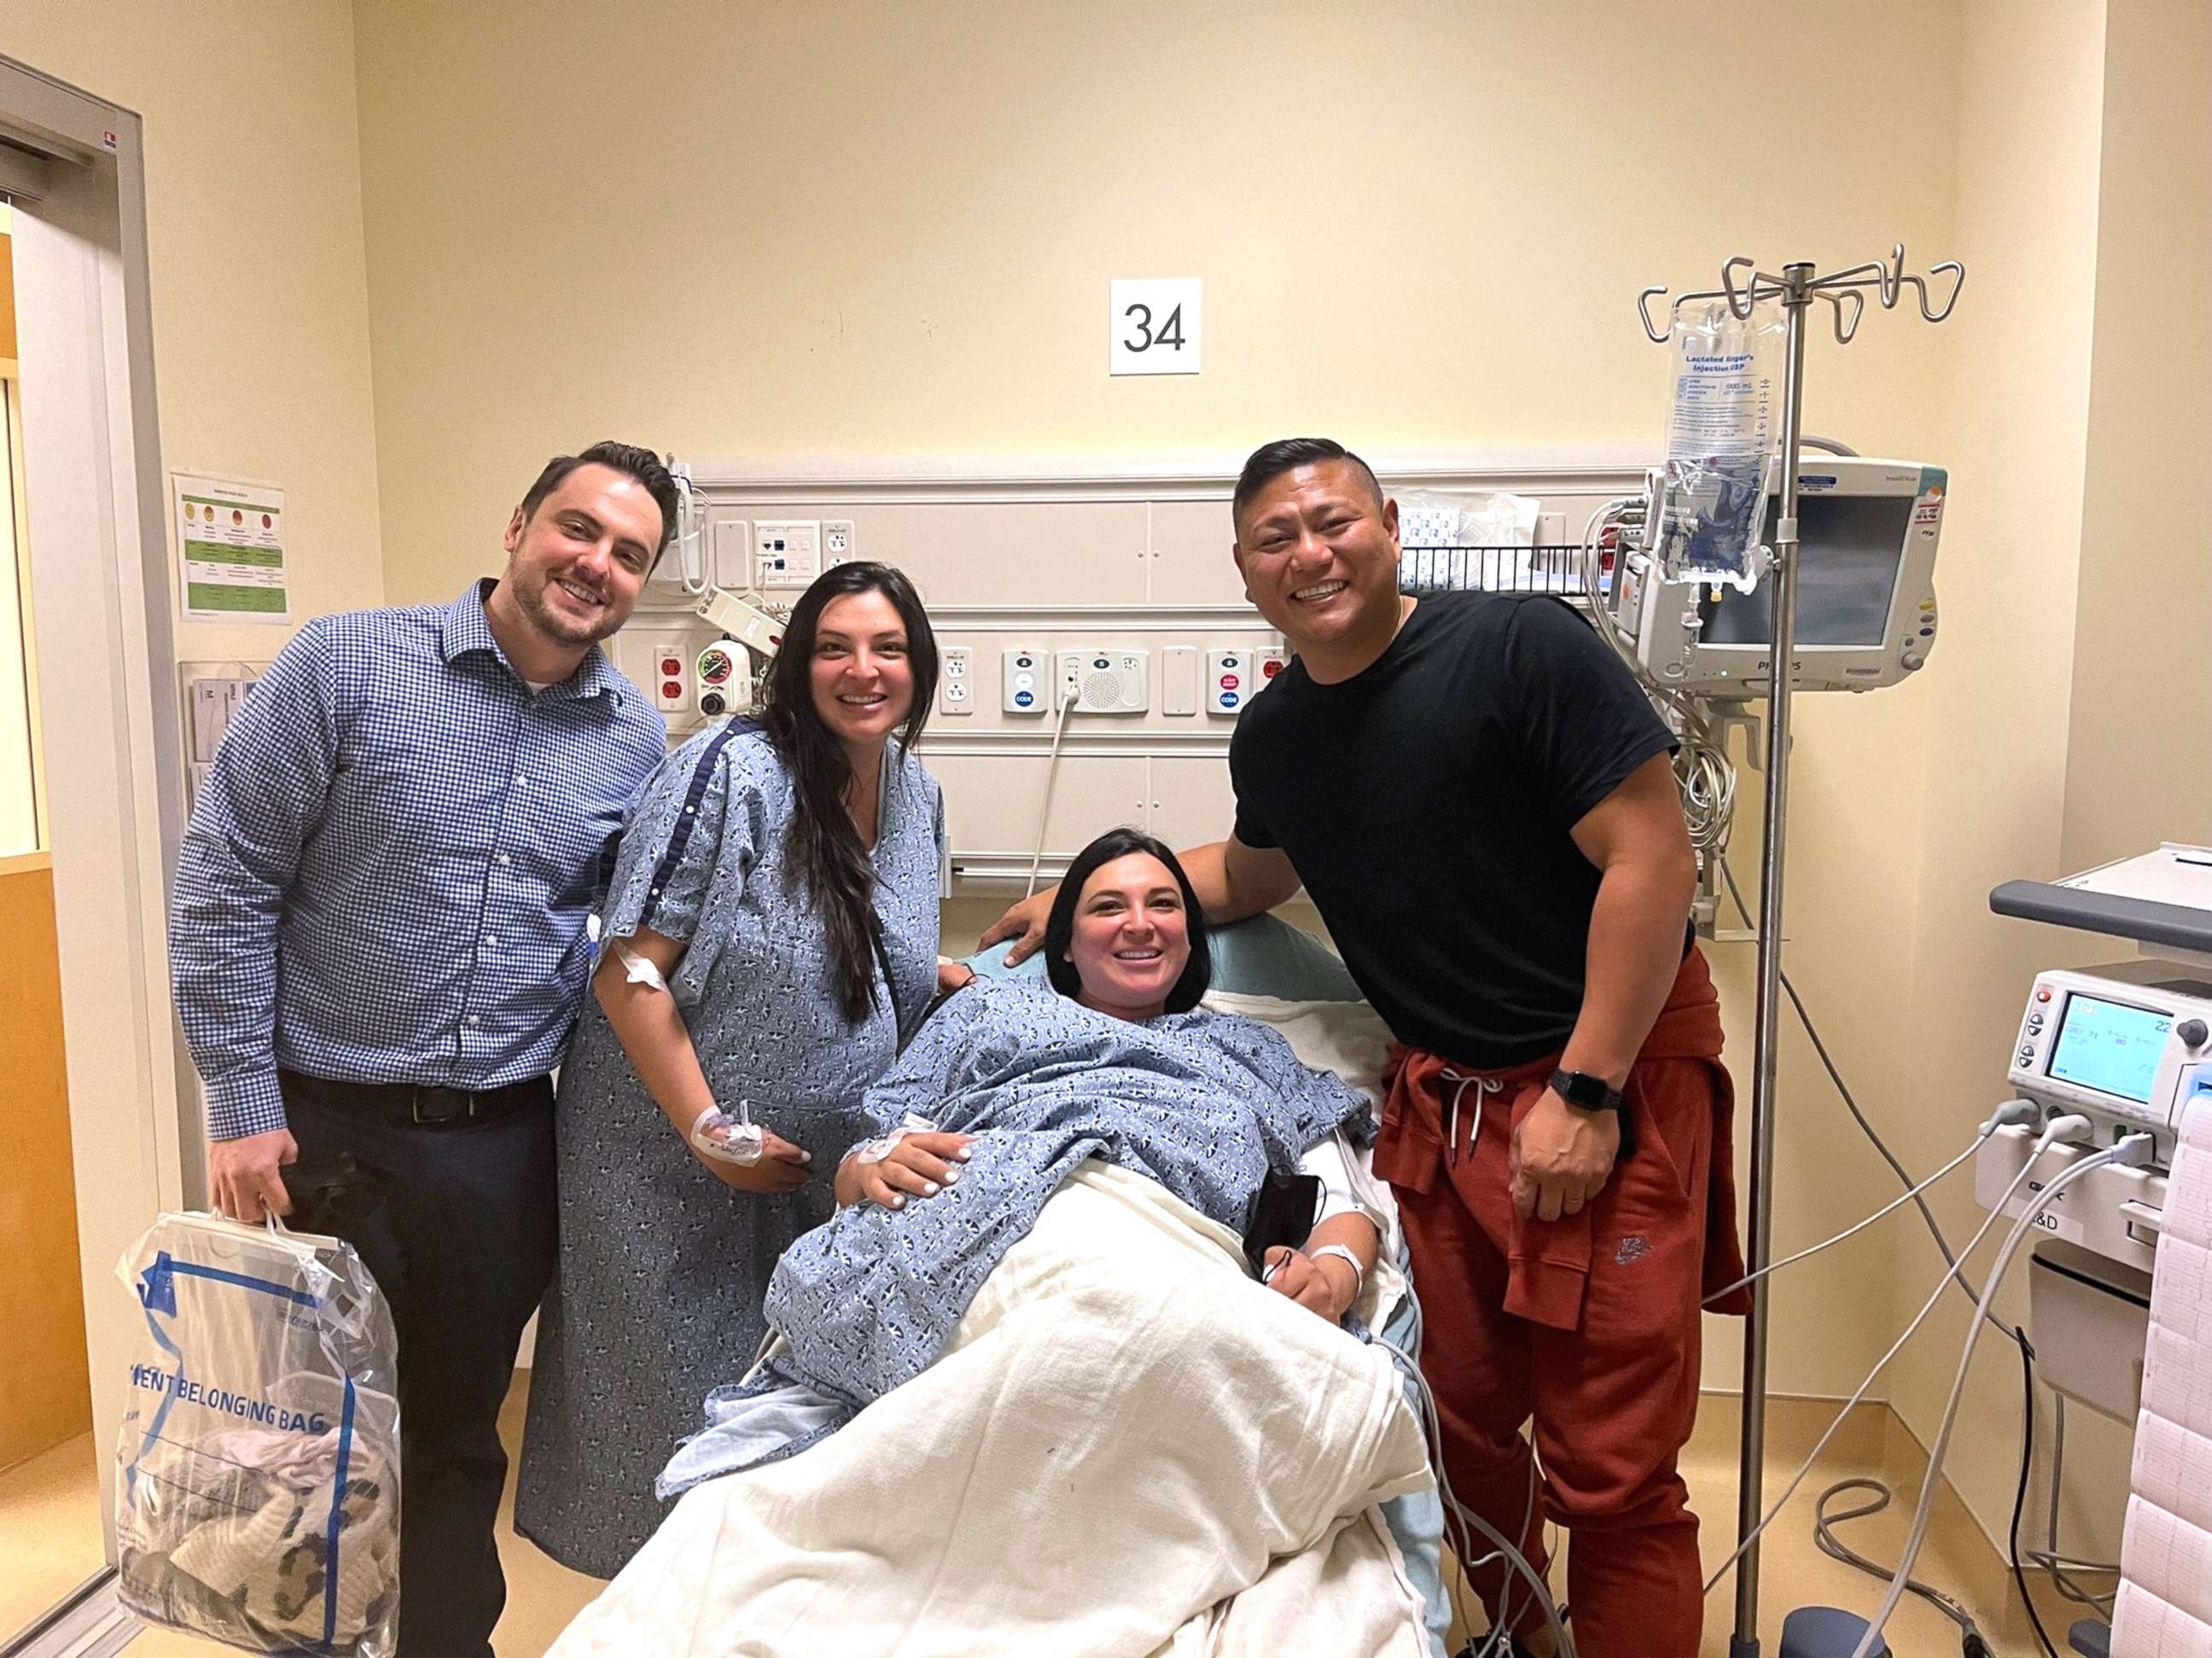 PHOTO: Erin and Zach Cheplak, far left, pose with Jill and Ian Justiniani at the California hospital where Erin and Jill each gave birth.